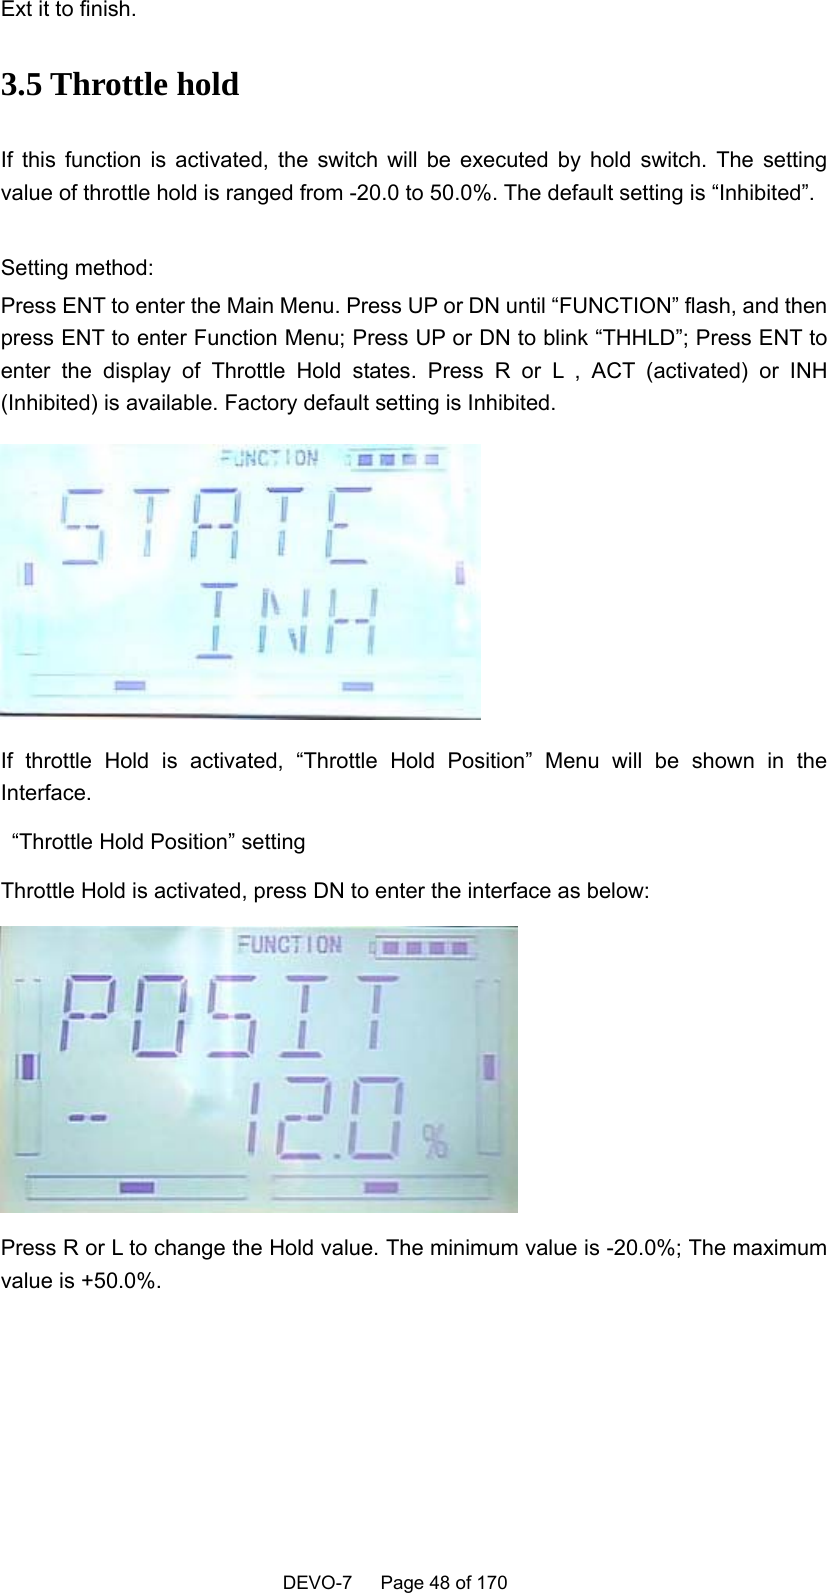    DEVO-7   Page 48 of 170   Ext it to finish. 3.5 Throttle hold If this function is activated, the switch will be executed by hold switch. The setting value of throttle hold is ranged from -20.0 to 50.0%. The default setting is “Inhibited”.    Setting method: Press ENT to enter the Main Menu. Press UP or DN until “FUNCTION” flash, and then press ENT to enter Function Menu; Press UP or DN to blink “THHLD”; Press ENT to enter the display of Throttle Hold states. Press R or L , ACT (activated) or INH (Inhibited) is available. Factory default setting is Inhibited.      If throttle Hold is activated, “Throttle Hold Position” Menu will be shown in the Interface.   “Throttle Hold Position” setting Throttle Hold is activated, press DN to enter the interface as below:  Press R or L to change the Hold value. The minimum value is -20.0%; The maximum value is +50.0%.  